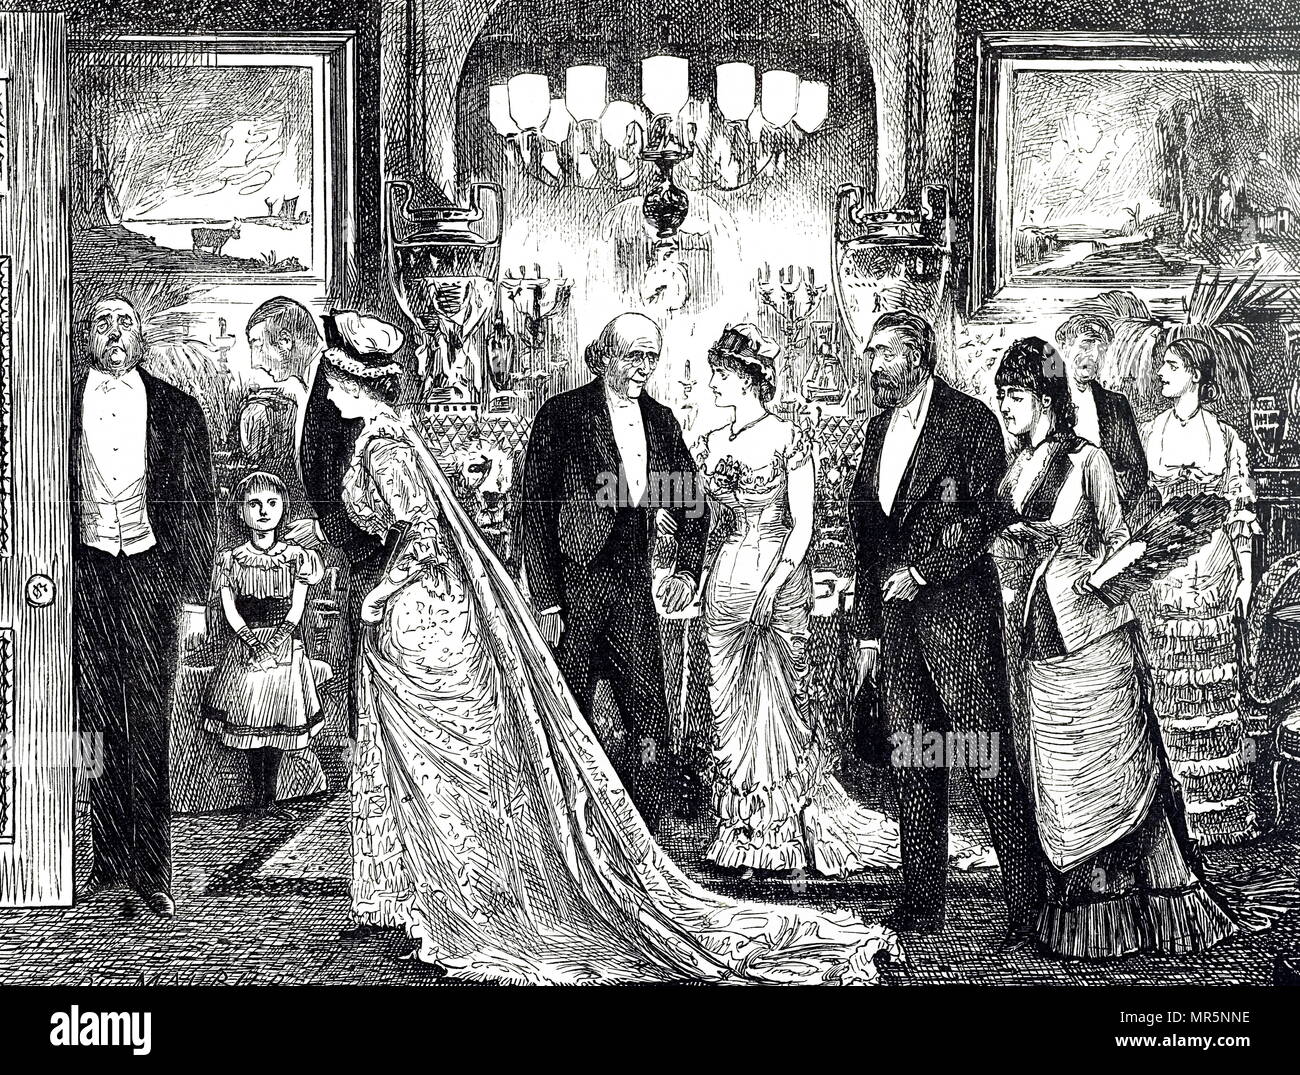 Cartoon depicting an elegant soirée in a Victorian home.  Illustrated by George du Maurier (1834-1896) a Franco-British cartoonist and author. Dated 19th century Stock Photo